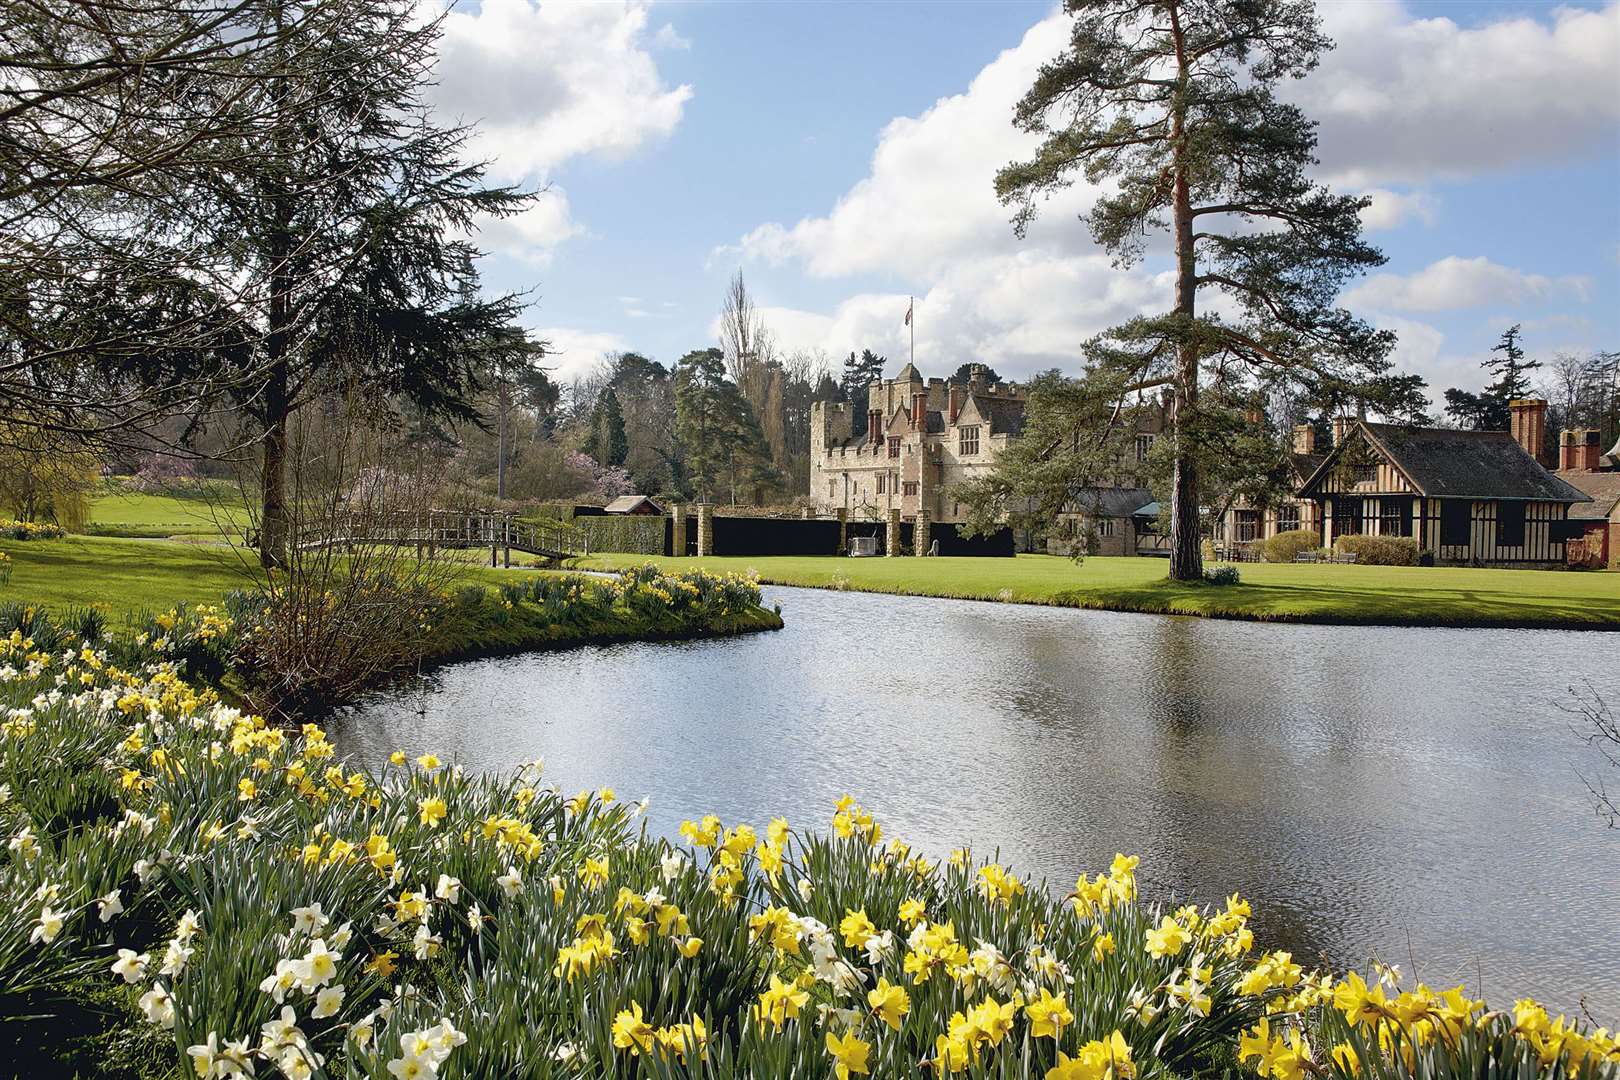 The daffodils will be out in full bloom during the school holidays. Picture: Hever Castle and Gardens